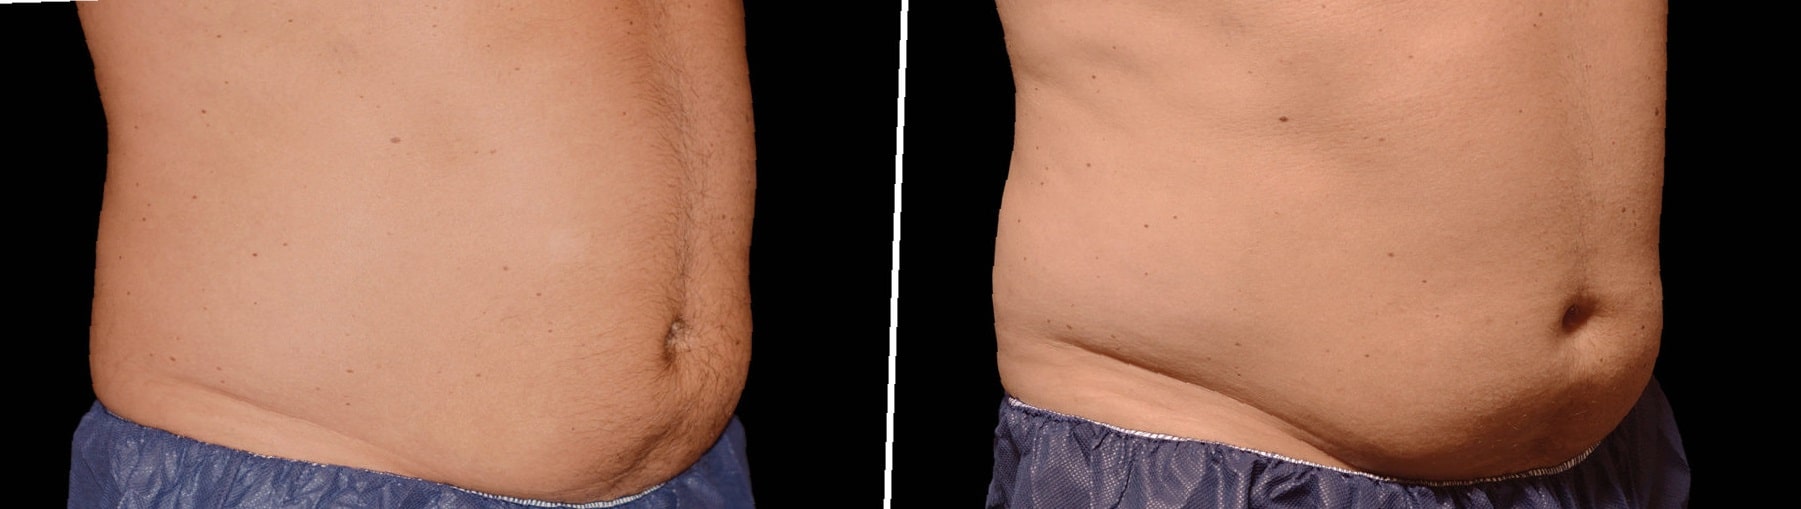 coolsculpting-before-and-after-stomach-4